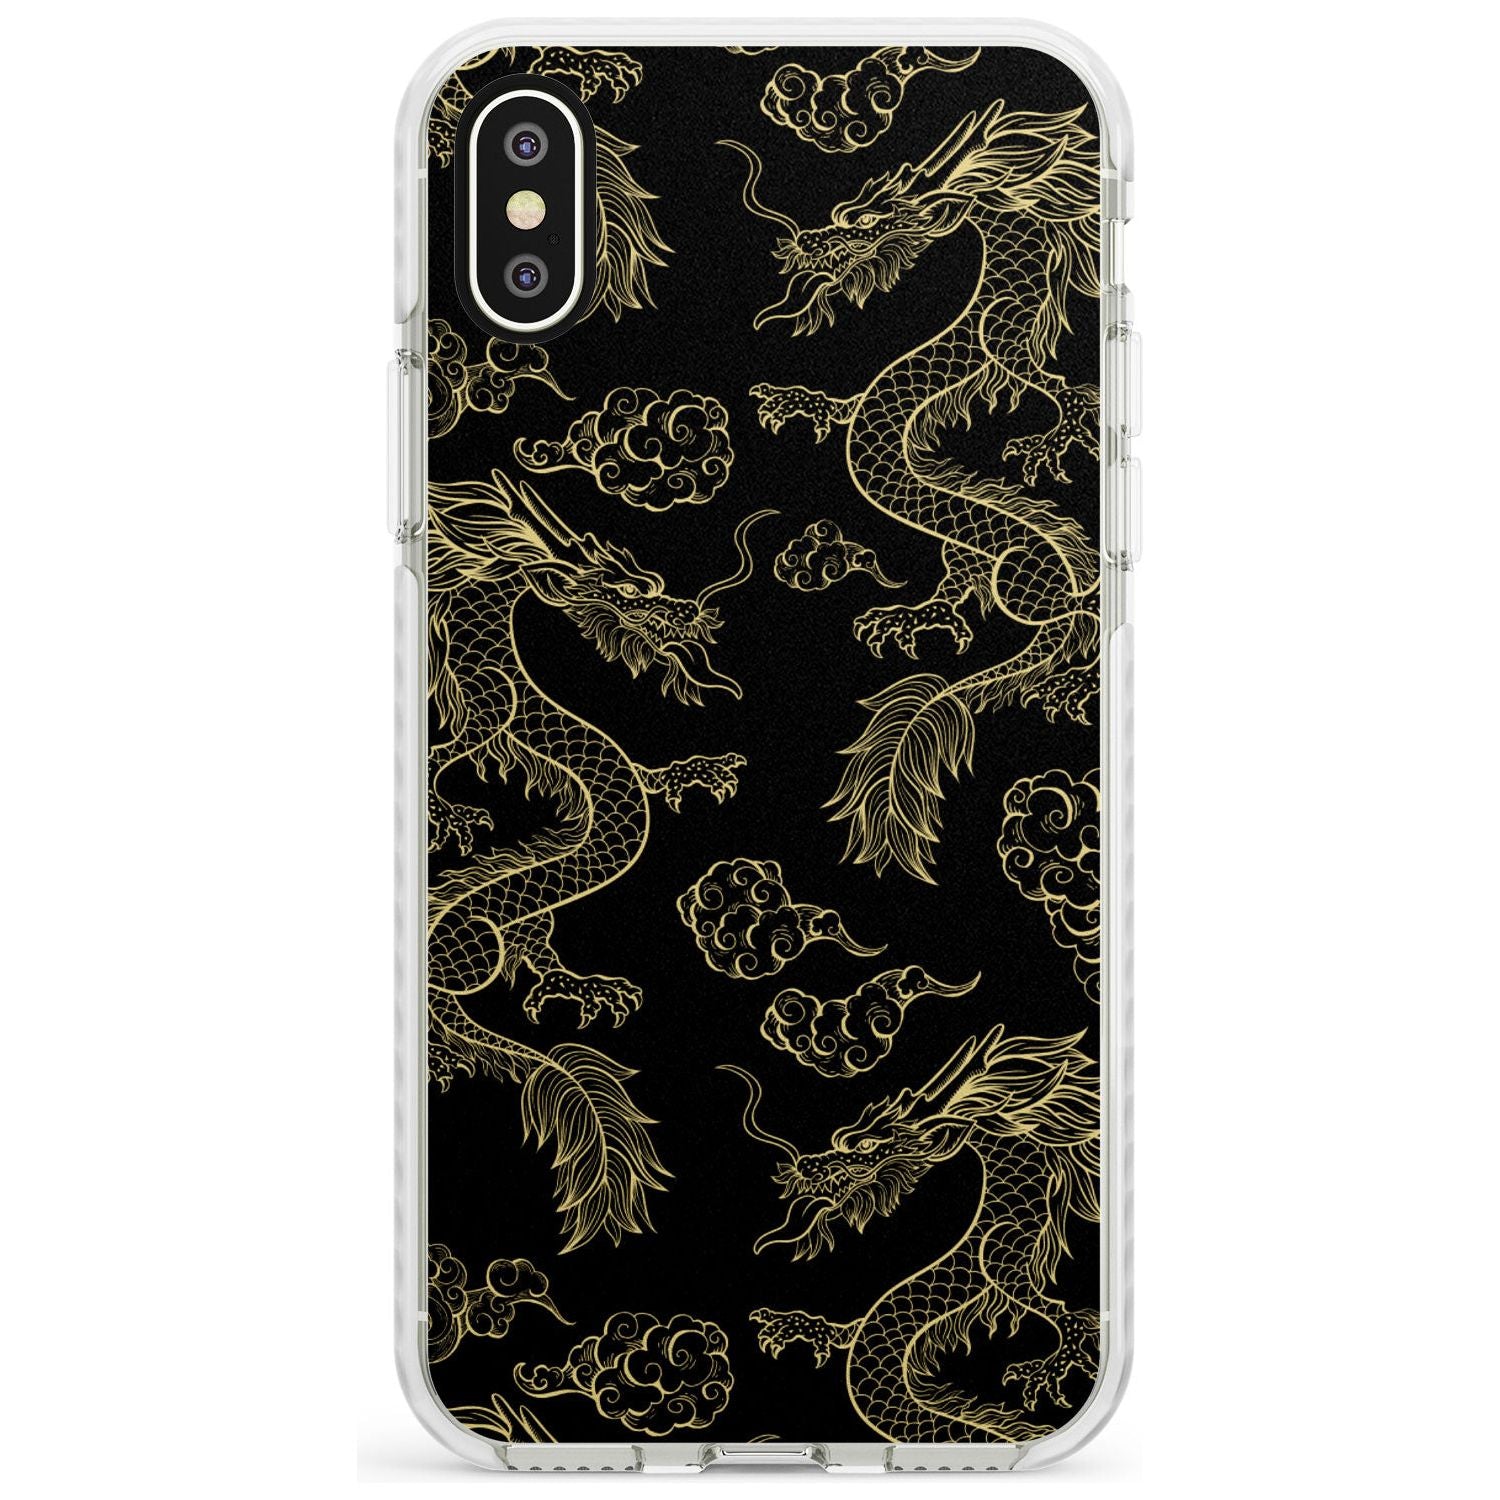 Black and Gold Dragon Pattern Impact Phone Case for iPhone X XS Max XR